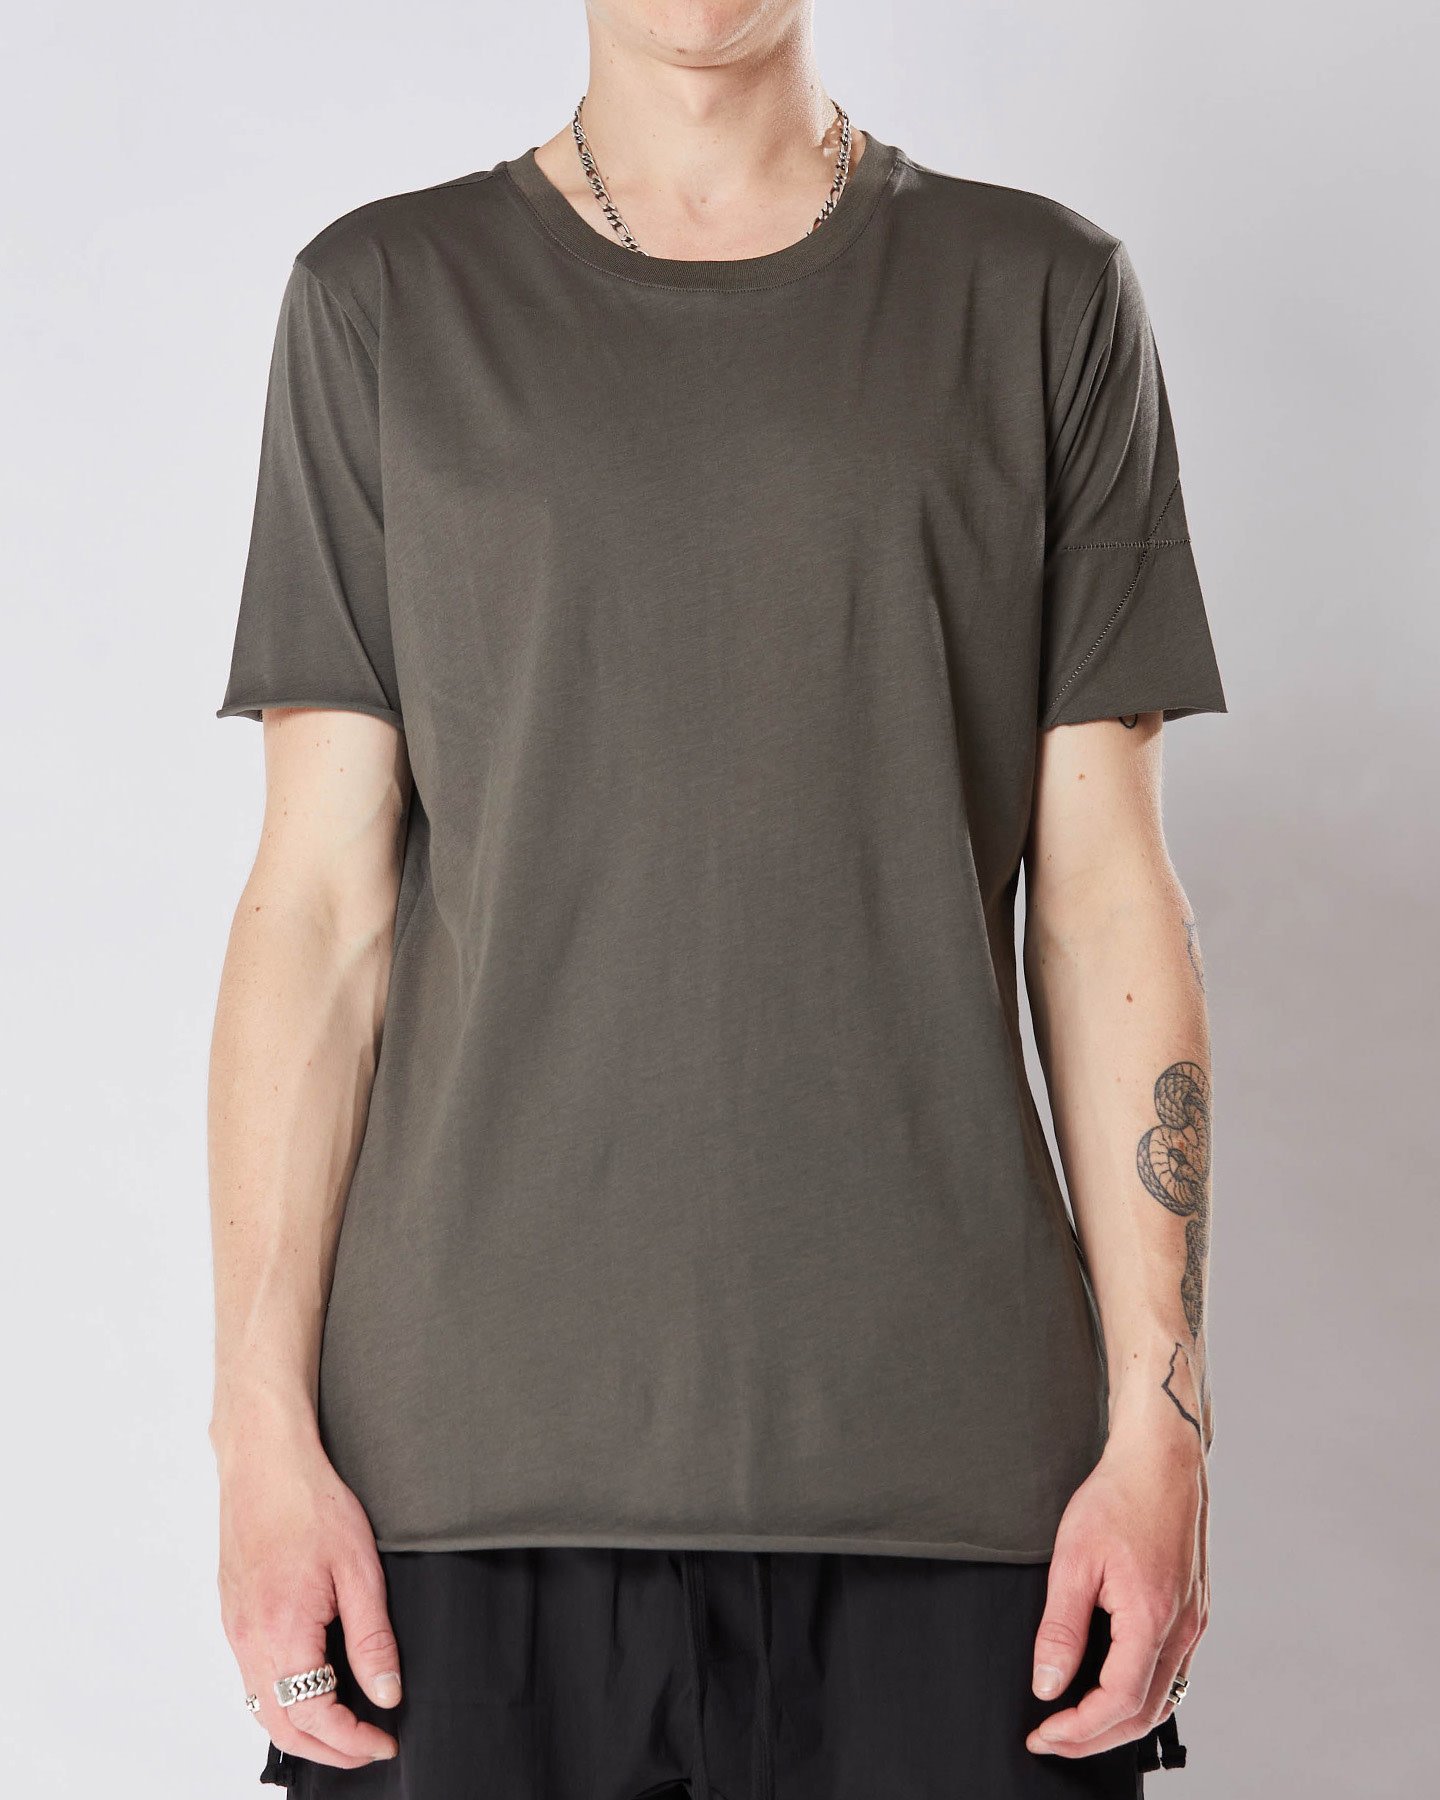 RAW HEM FITTED COTTON T-SHIRT - IVY